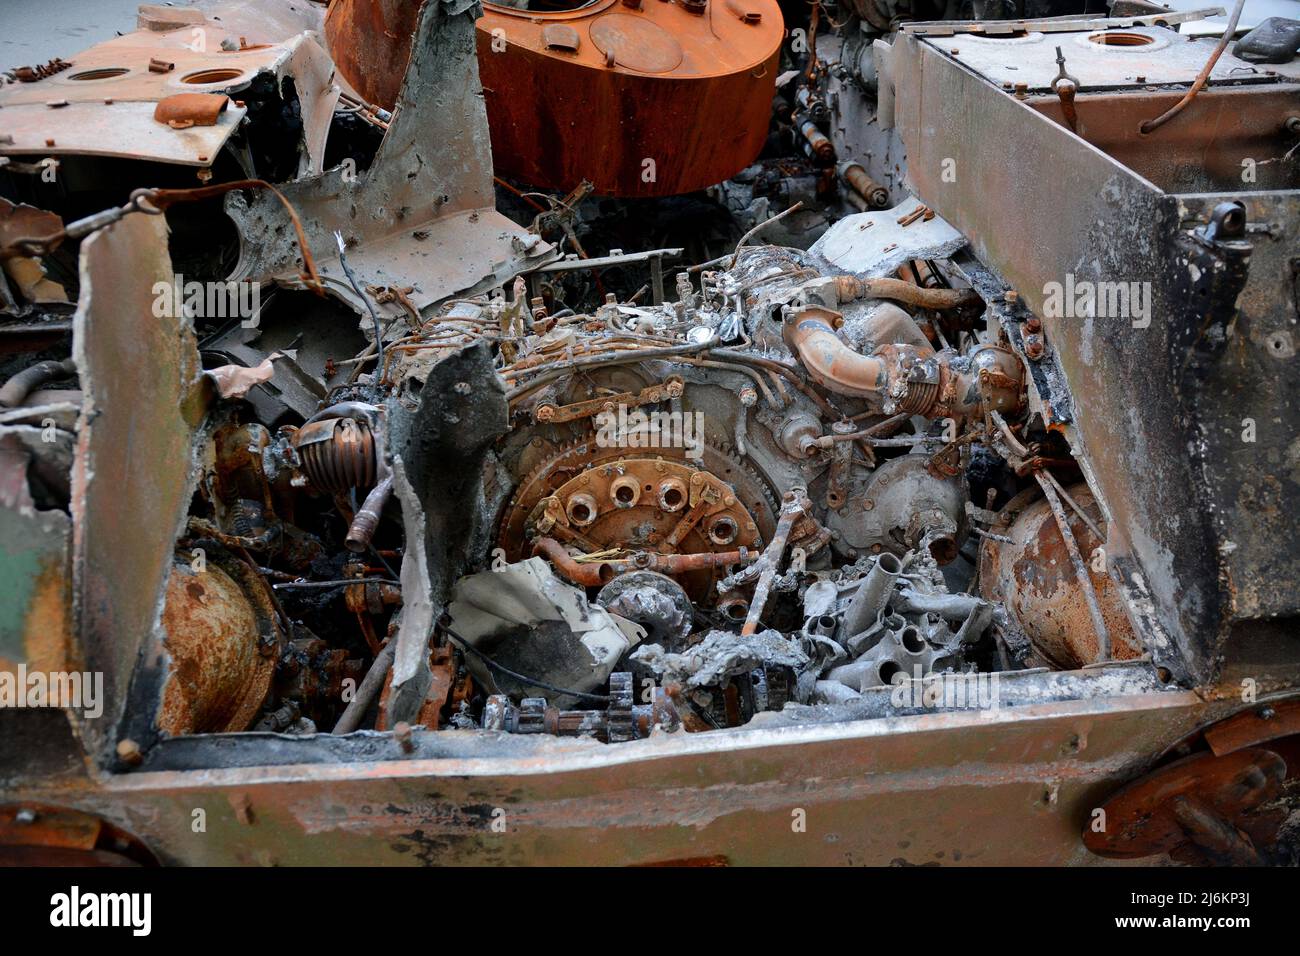 Kyiv region, Ukraine - 02 May 2022, Close-up of the engine of a destroyed Russian tank seen on the roadside, it was destroyed by the Ukrainian military in the Kiev region. Russia invaded Ukraine on 24 February 2022, triggering the largest military attack in Europe since World War II. Stock Photo